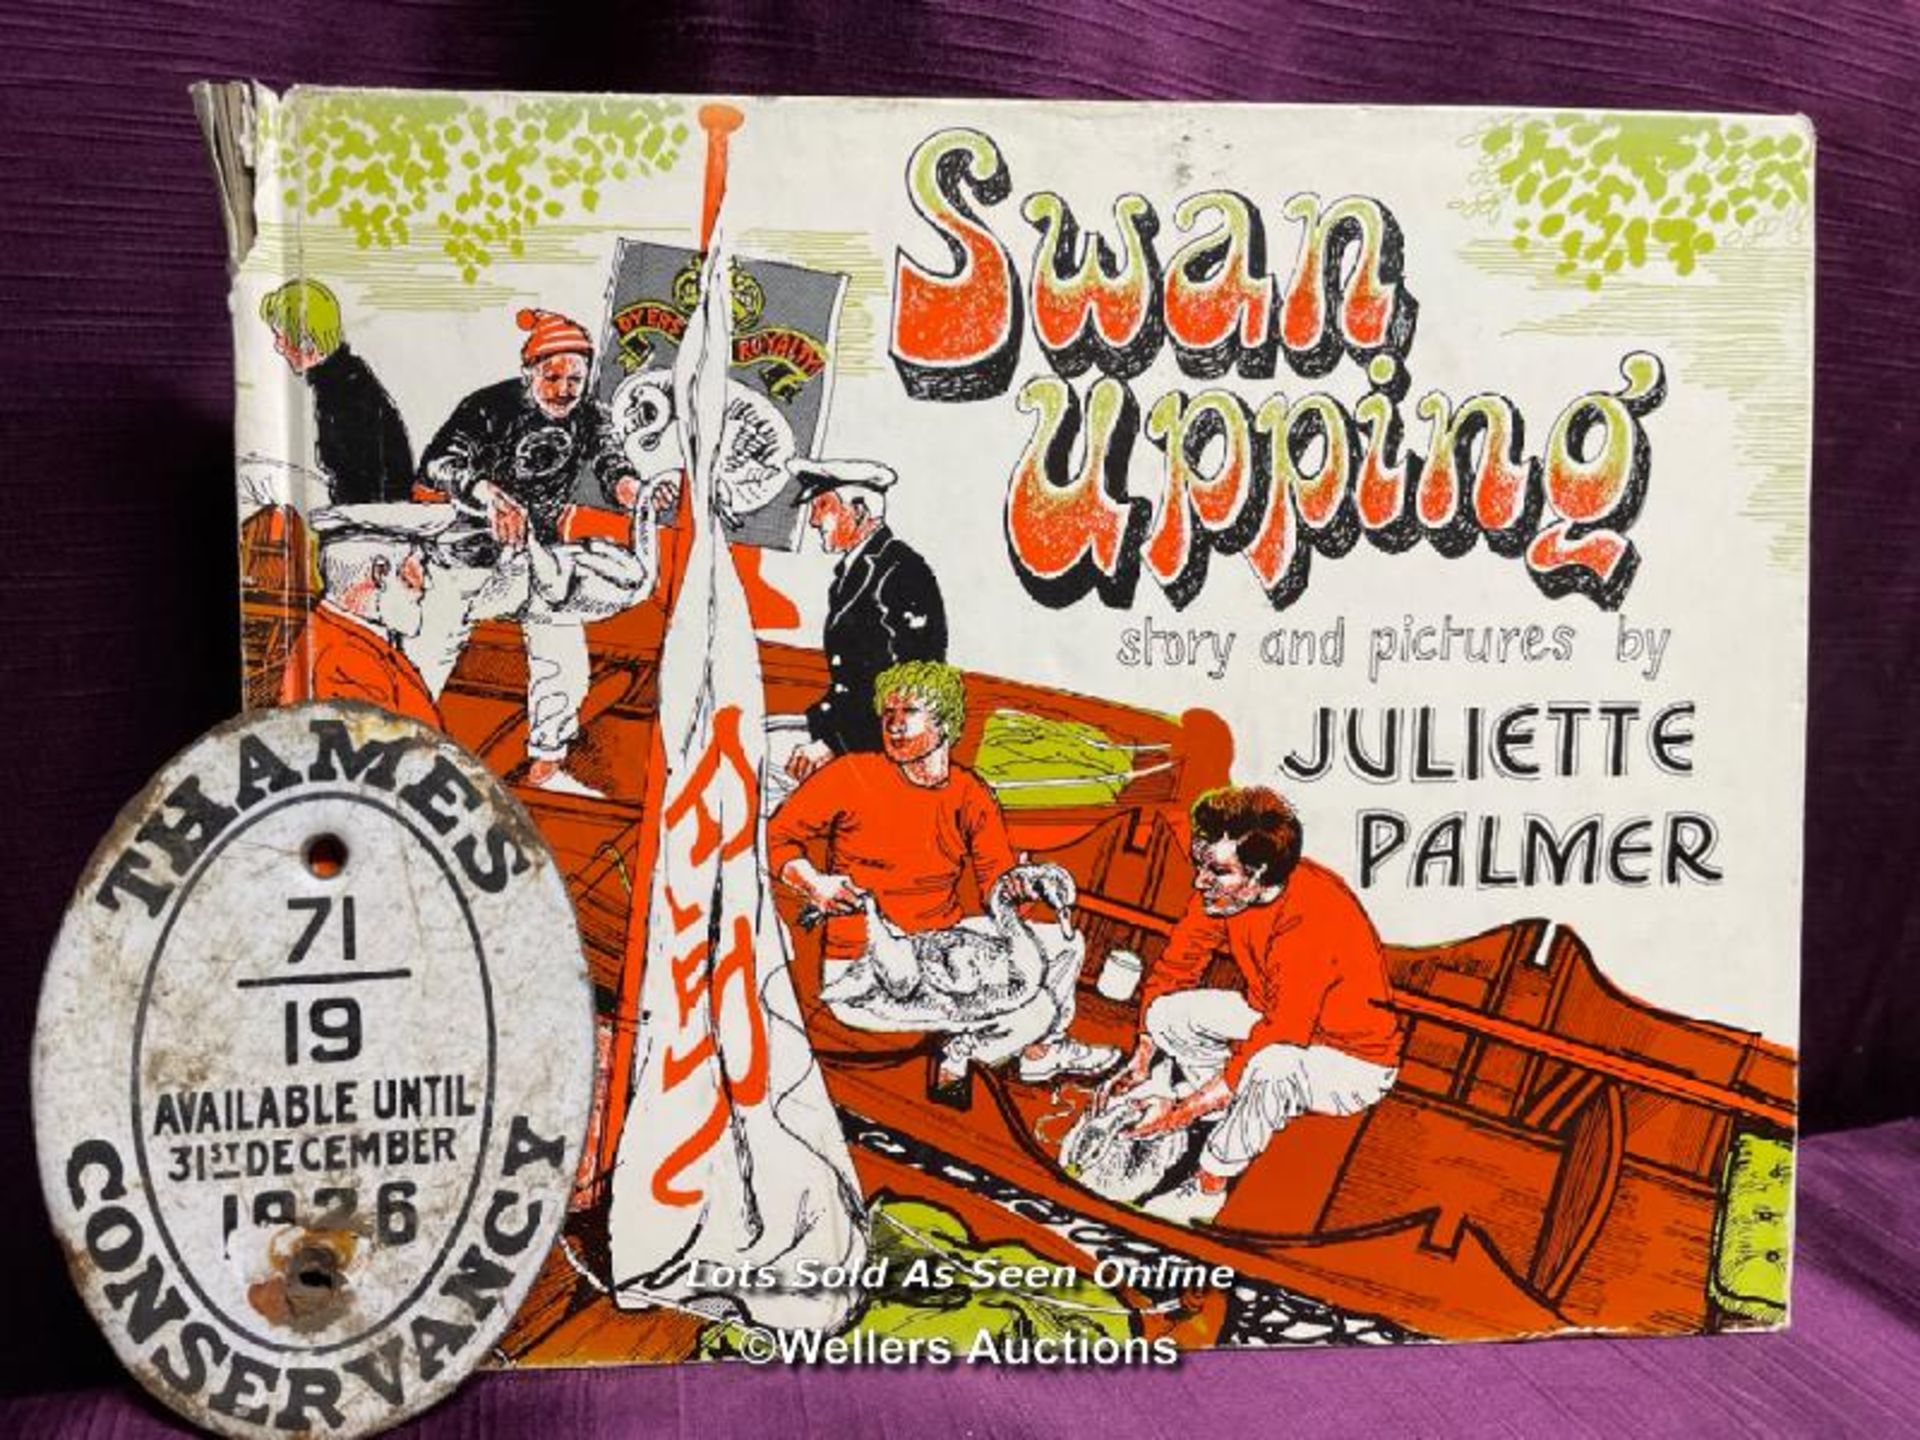 1974 SWAN UPPING BY JULIETTE PALMER, NICELY ILLUSTRATED, FEATURES LOTS OF LOCAL CELEBRITIES INC.